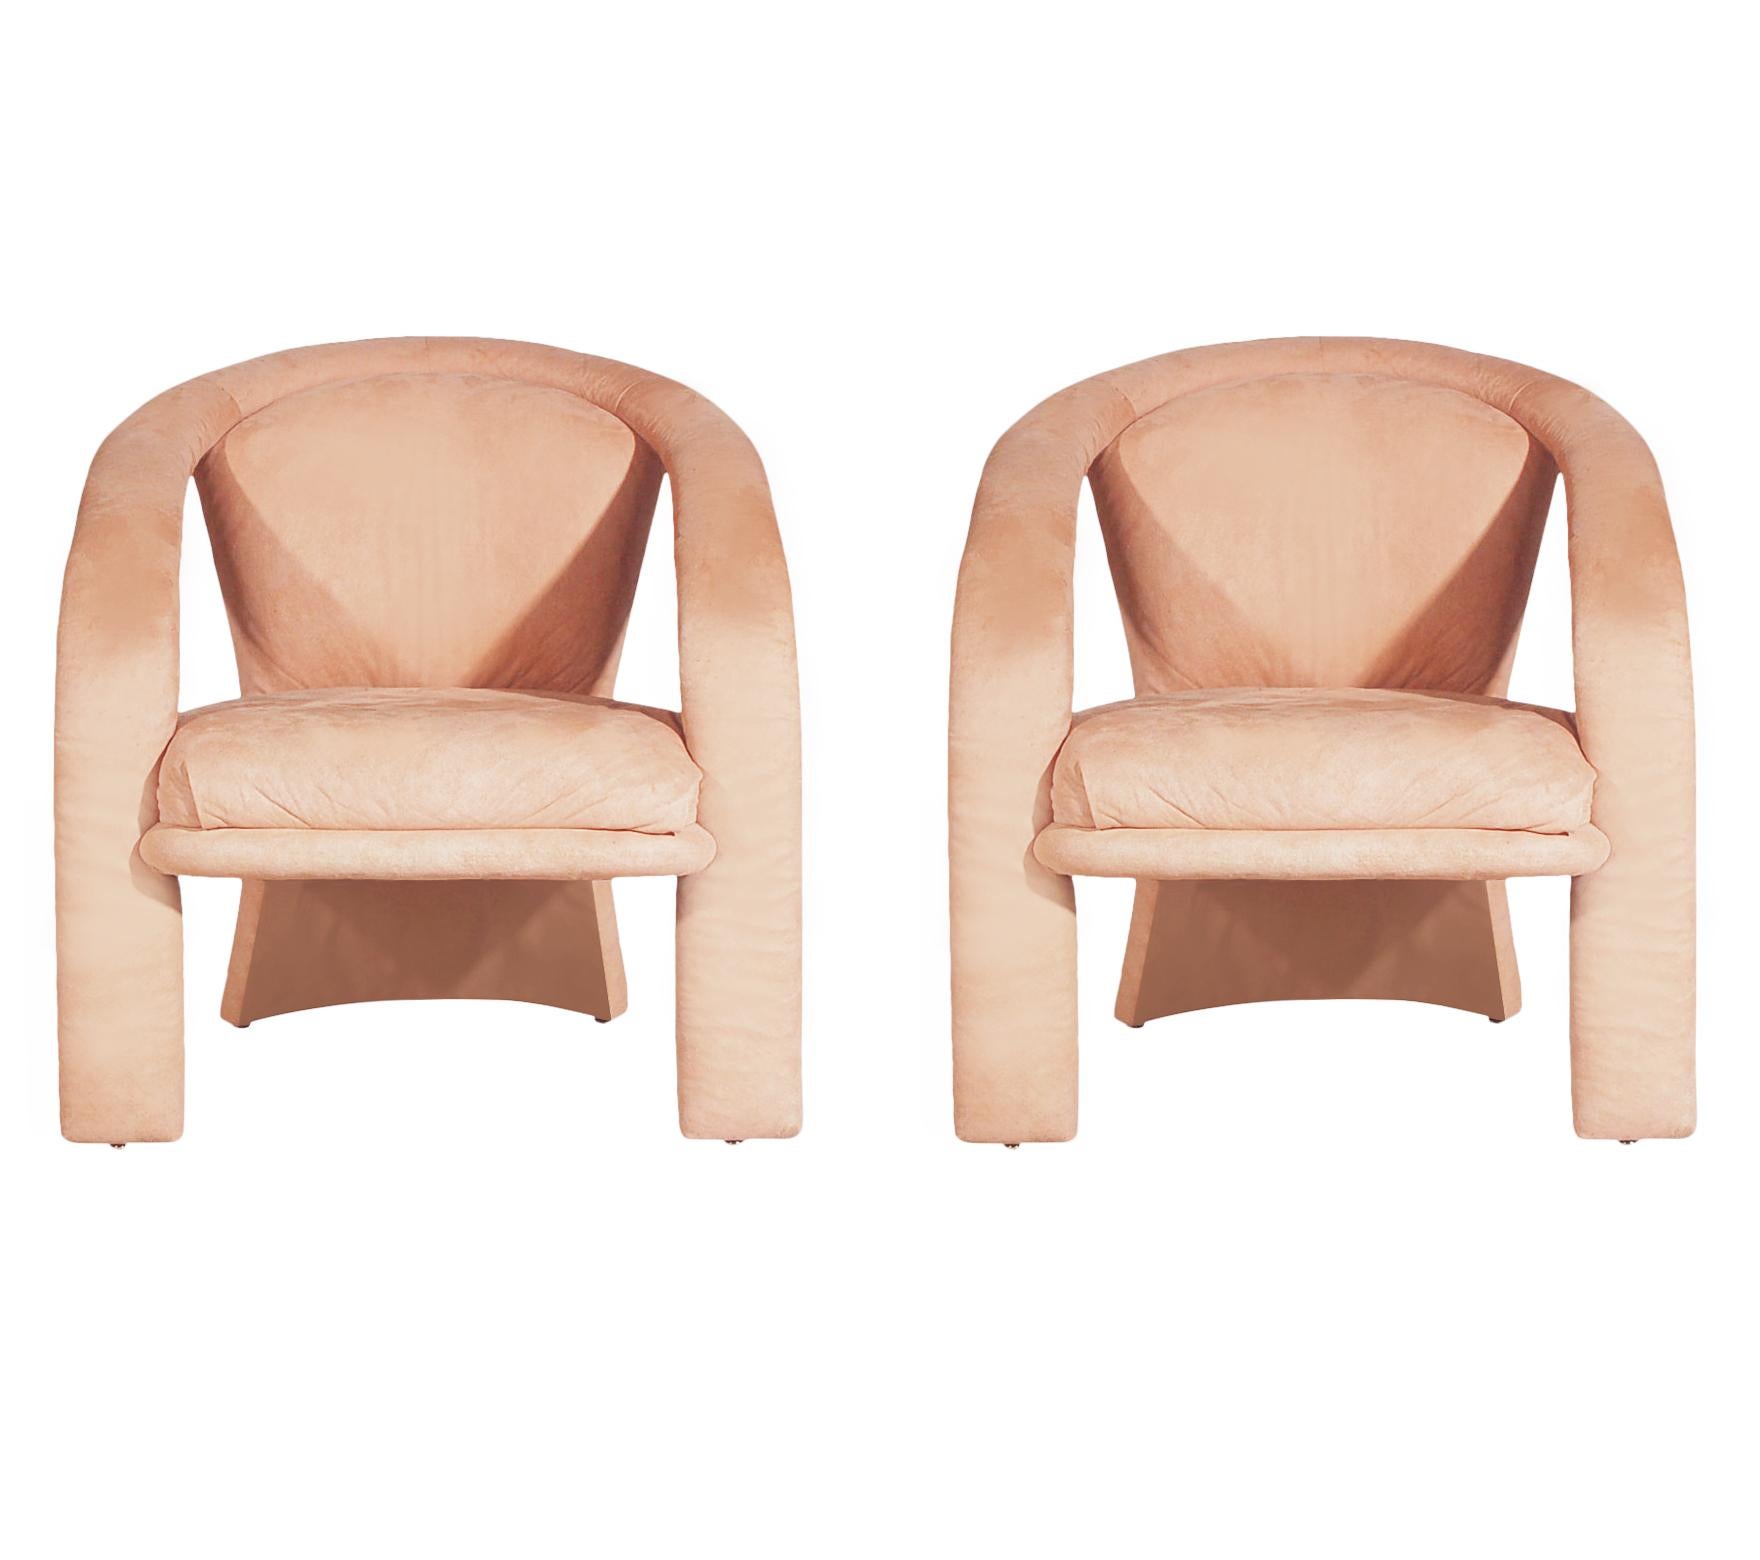 Pair of Decorator Mid Century Post Modern Armchair Lounge Chairs in Blush Pink In Fair Condition For Sale In Philadelphia, PA